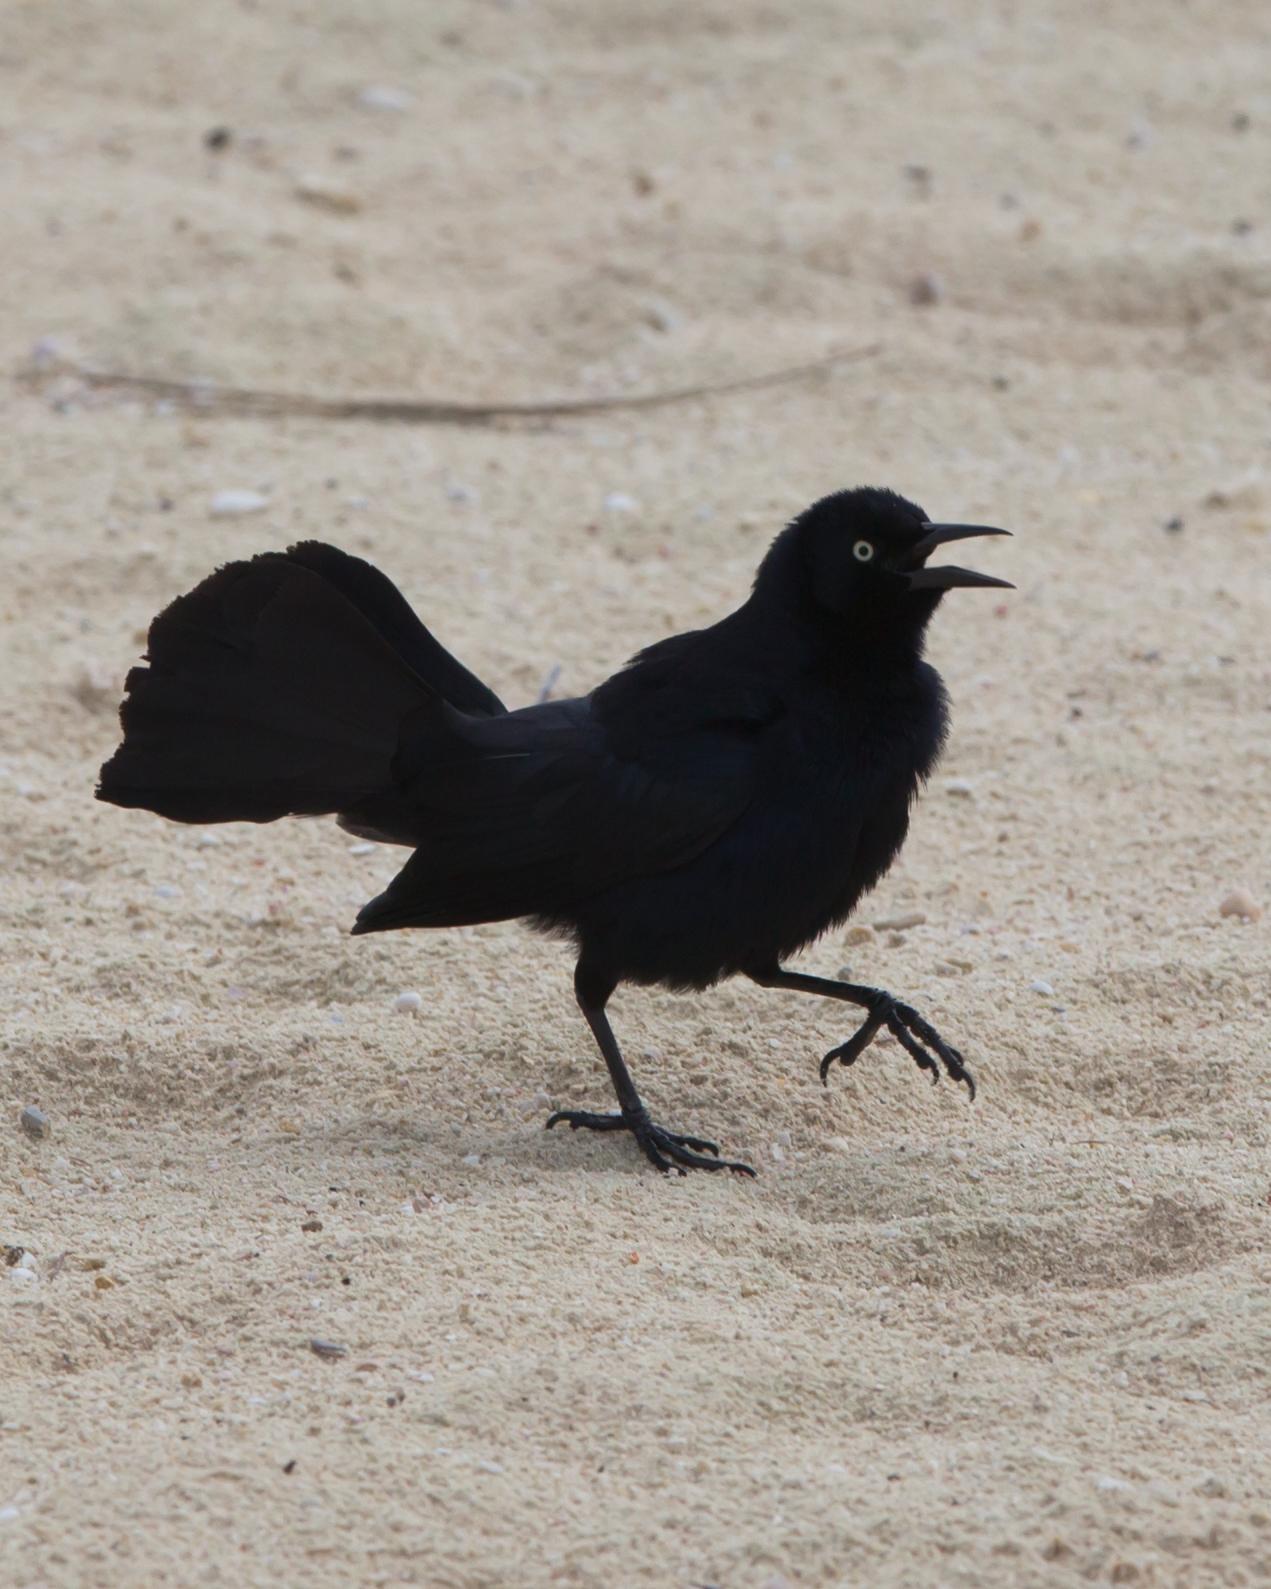 Greater Antillean Grackle Photo by Kevin Berkoff